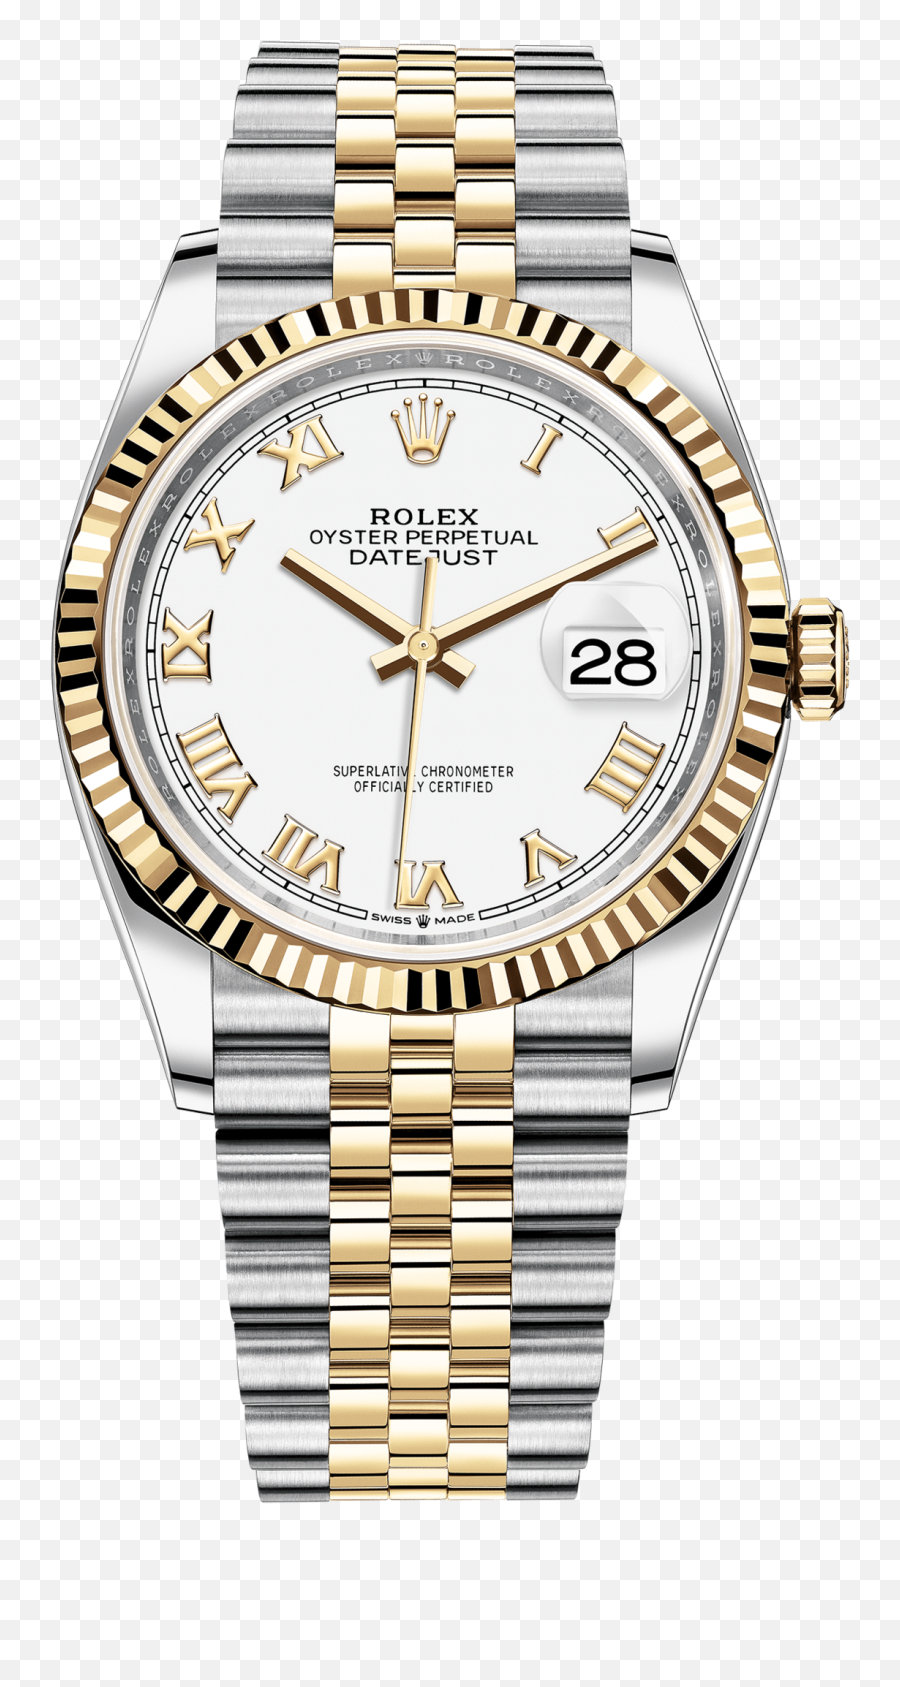 Rolex Datejust 36 Watch Yellow Rolesor - Combination Of Watch Emoji,Emotion Guster In The Water